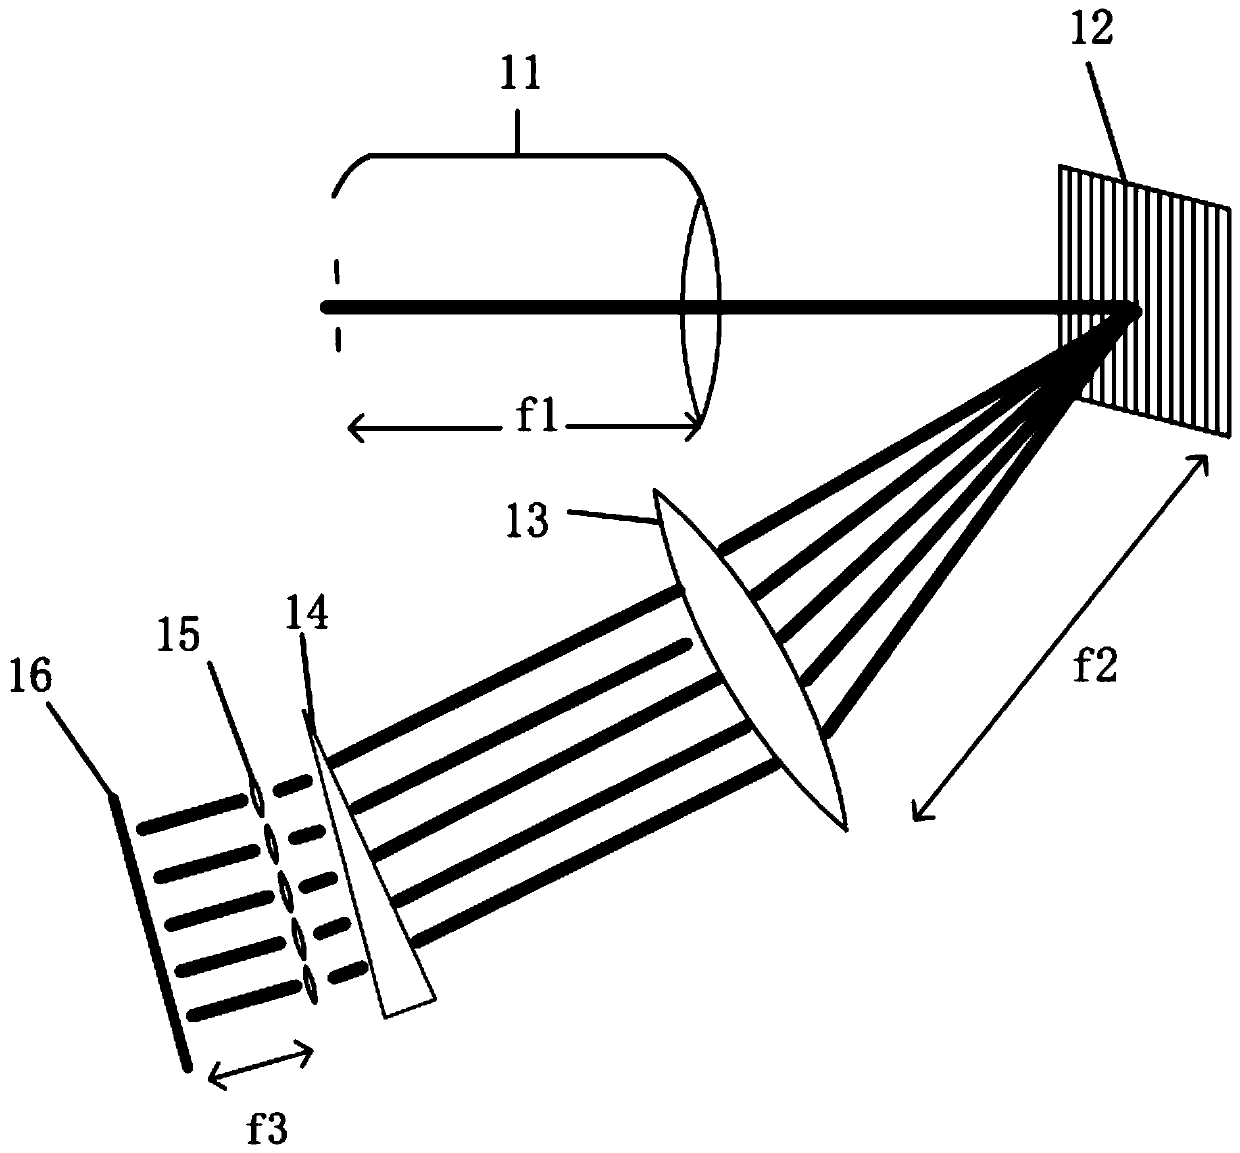 Imaging spectrograph based on laminated glass mapping